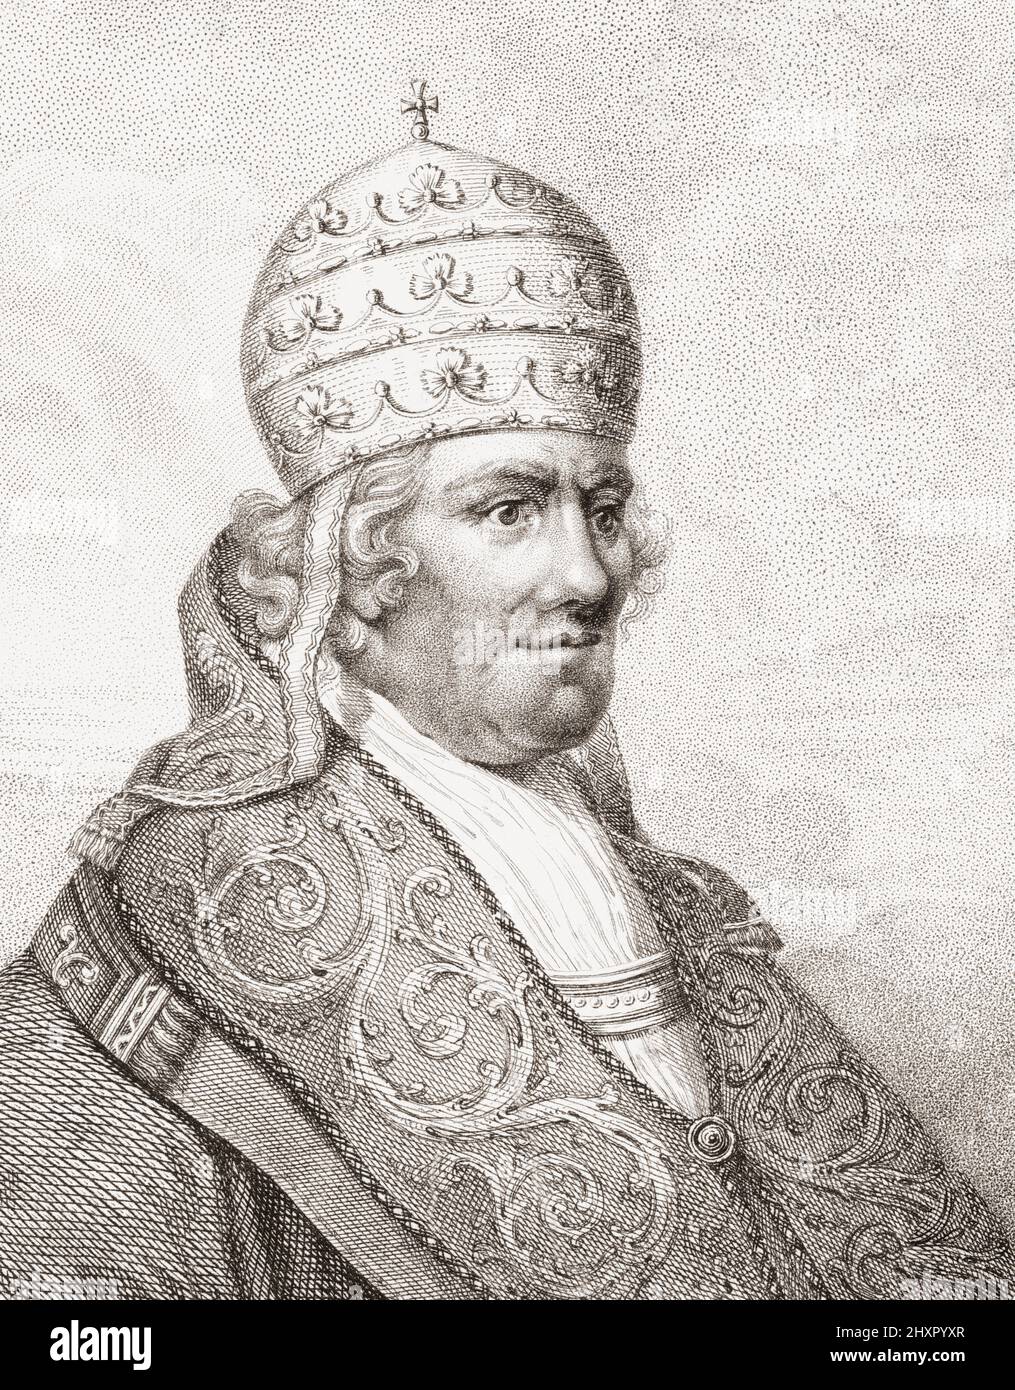 Pope Clement XIV, 1705 – 1774.  Italian.  Born Giovanni Vincenzo Antonio Ganganelli.  He was elected Pope in 1769.  Detail of a 1784 portrait by Trotter. Stock Photo